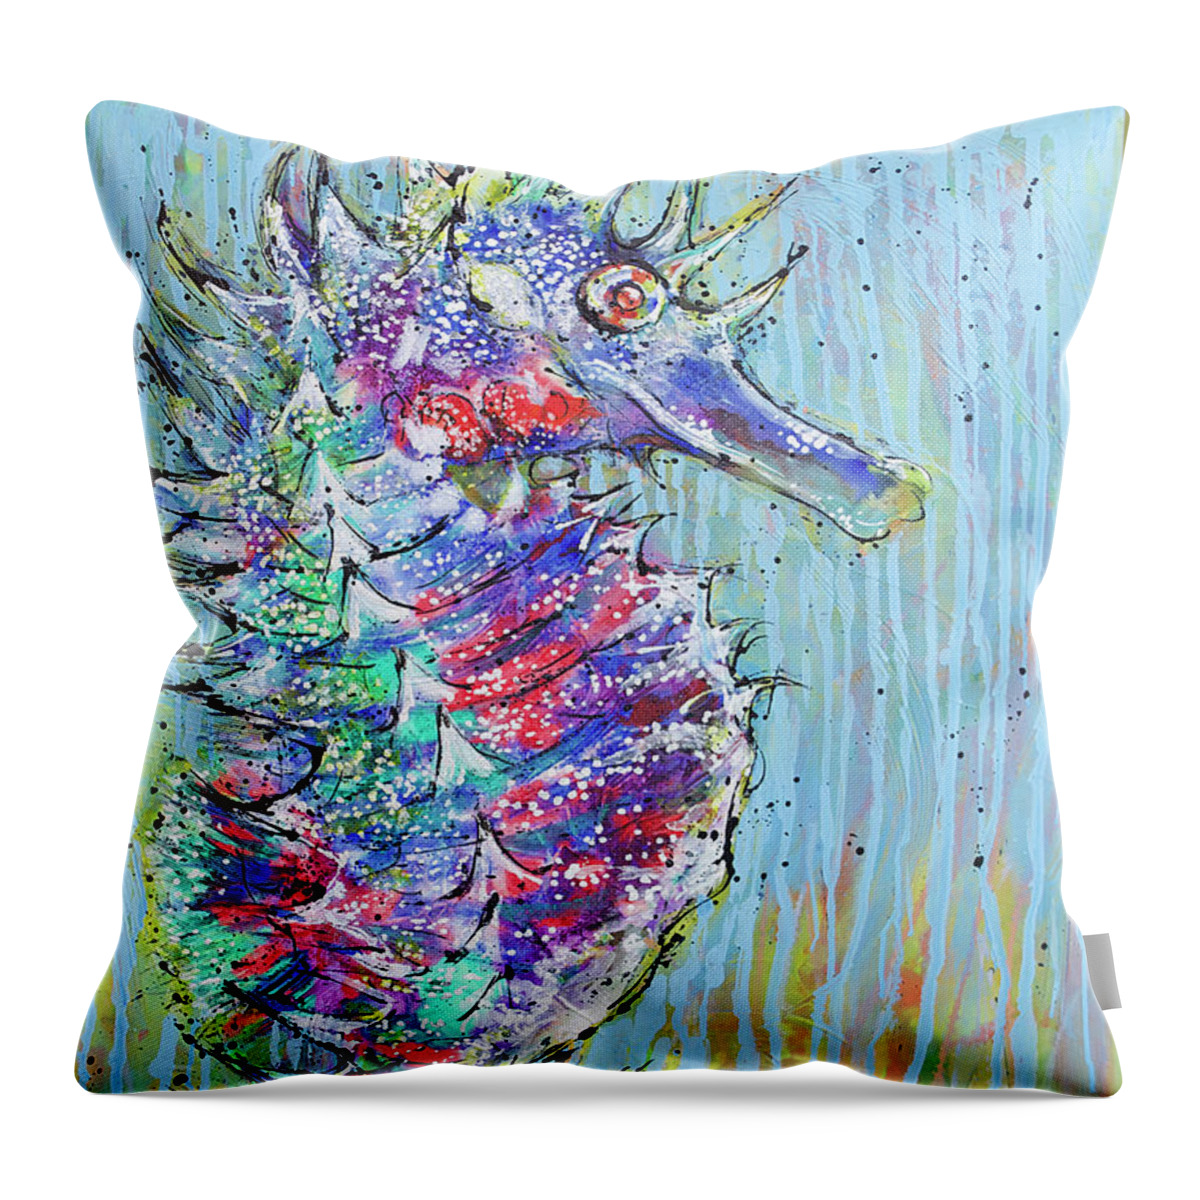 Seahorse Throw Pillow featuring the painting Spiny Seahorse by Jyotika Shroff